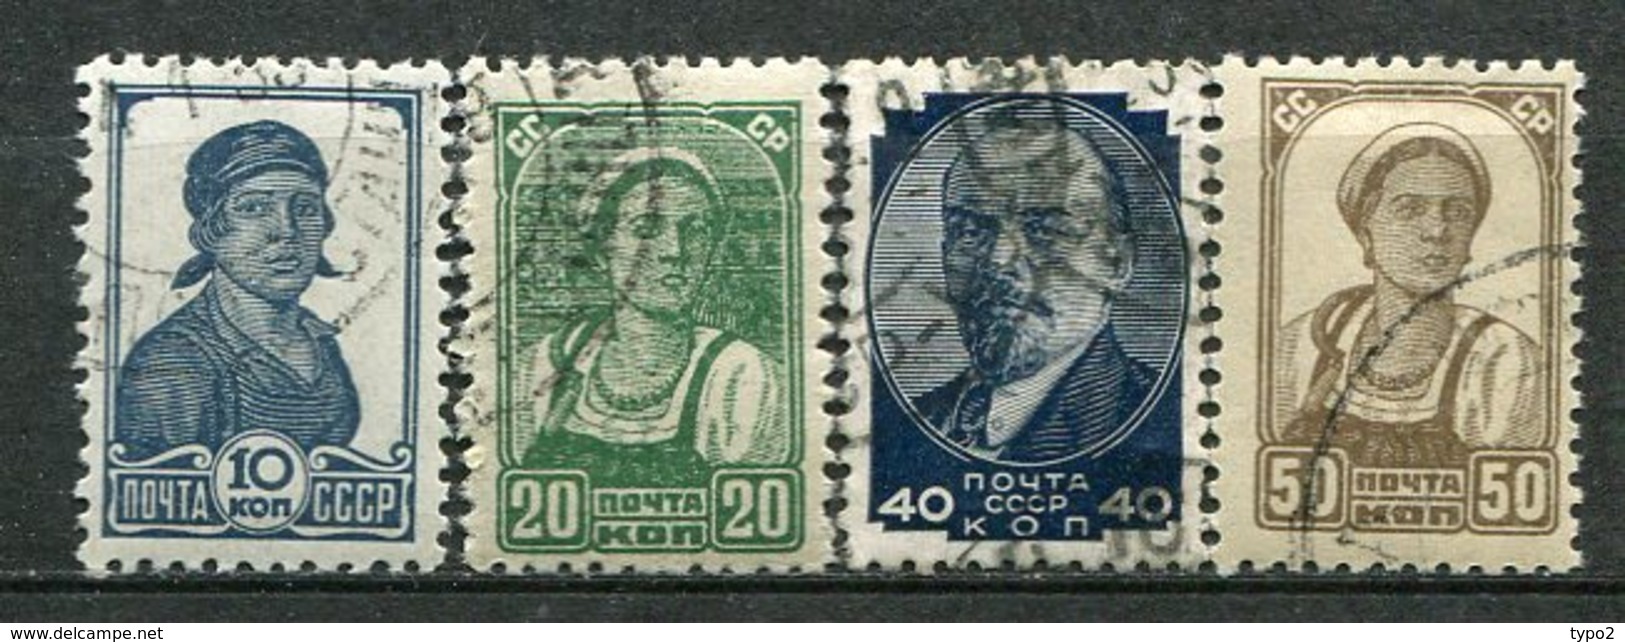 RUSSIE -  Yv N° 611A,612,613,613A  (o) 10,20,40,50k  Série Courante Sans Filigrane   Cote  1,5  Euro  BER 2 Scans - Used Stamps